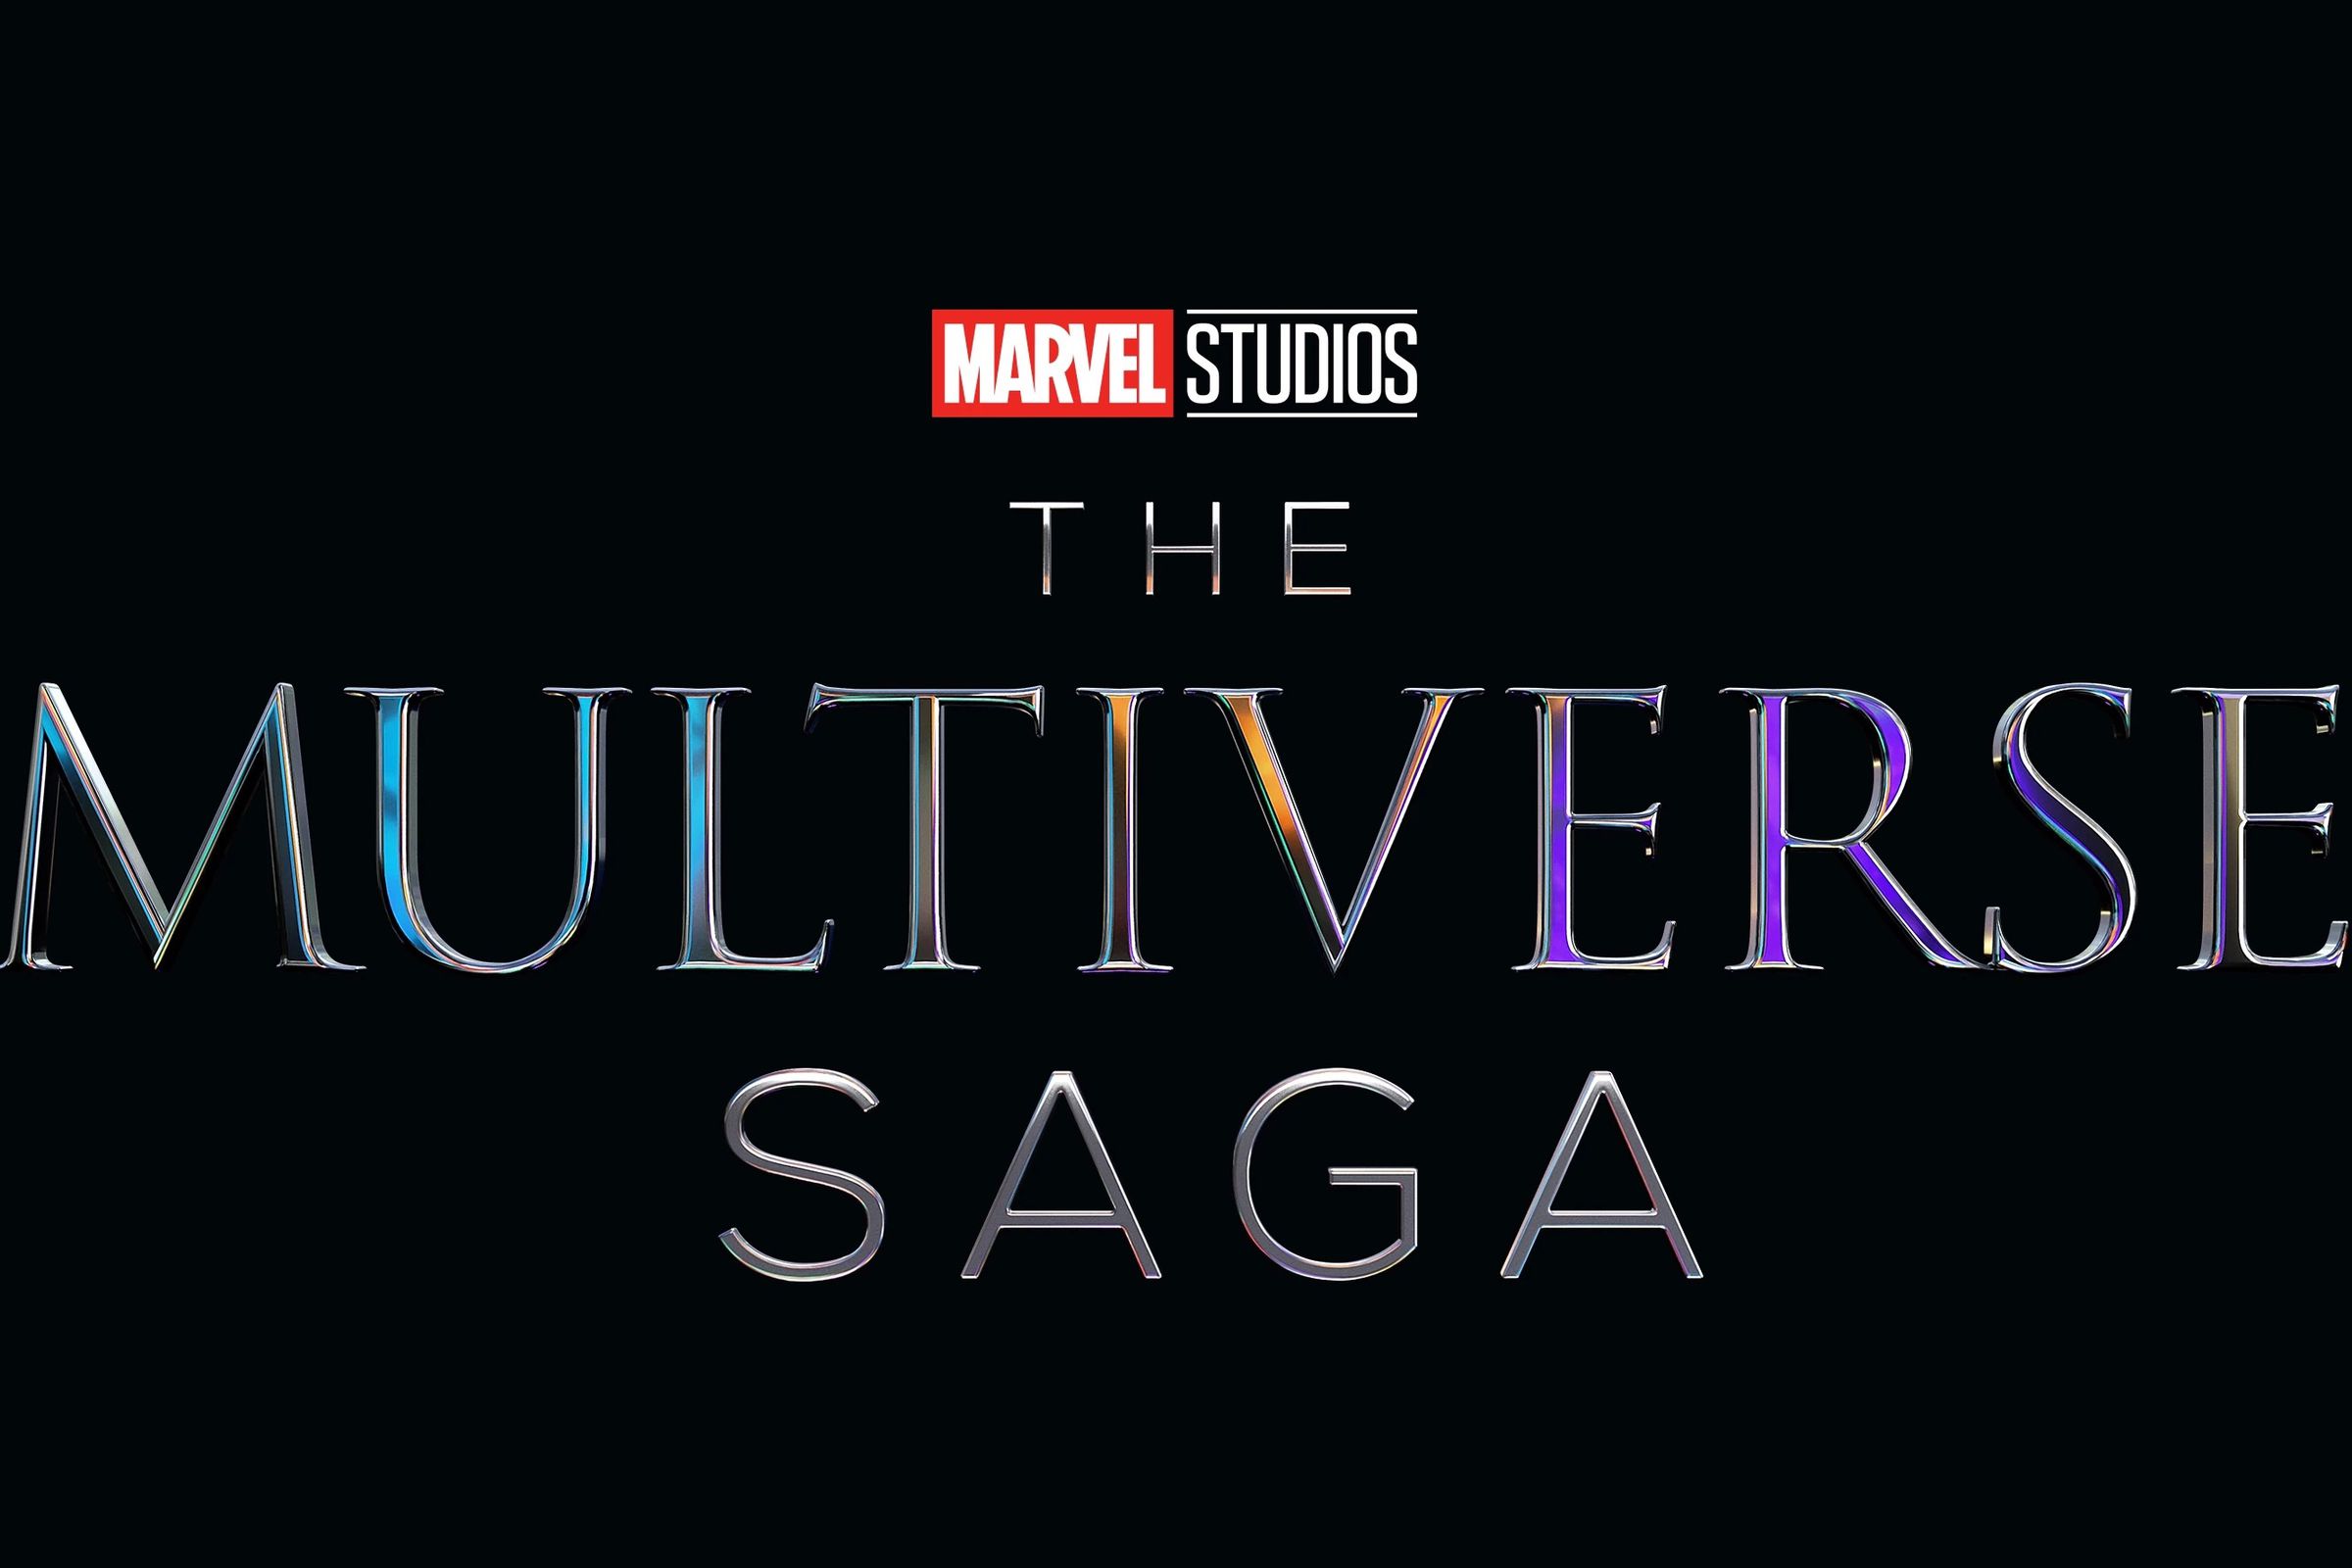 Marvel’s Multiverse Saga logo, which is just the phrase “the Multiverse Saga” written in iridescent letters on a black backdrop.